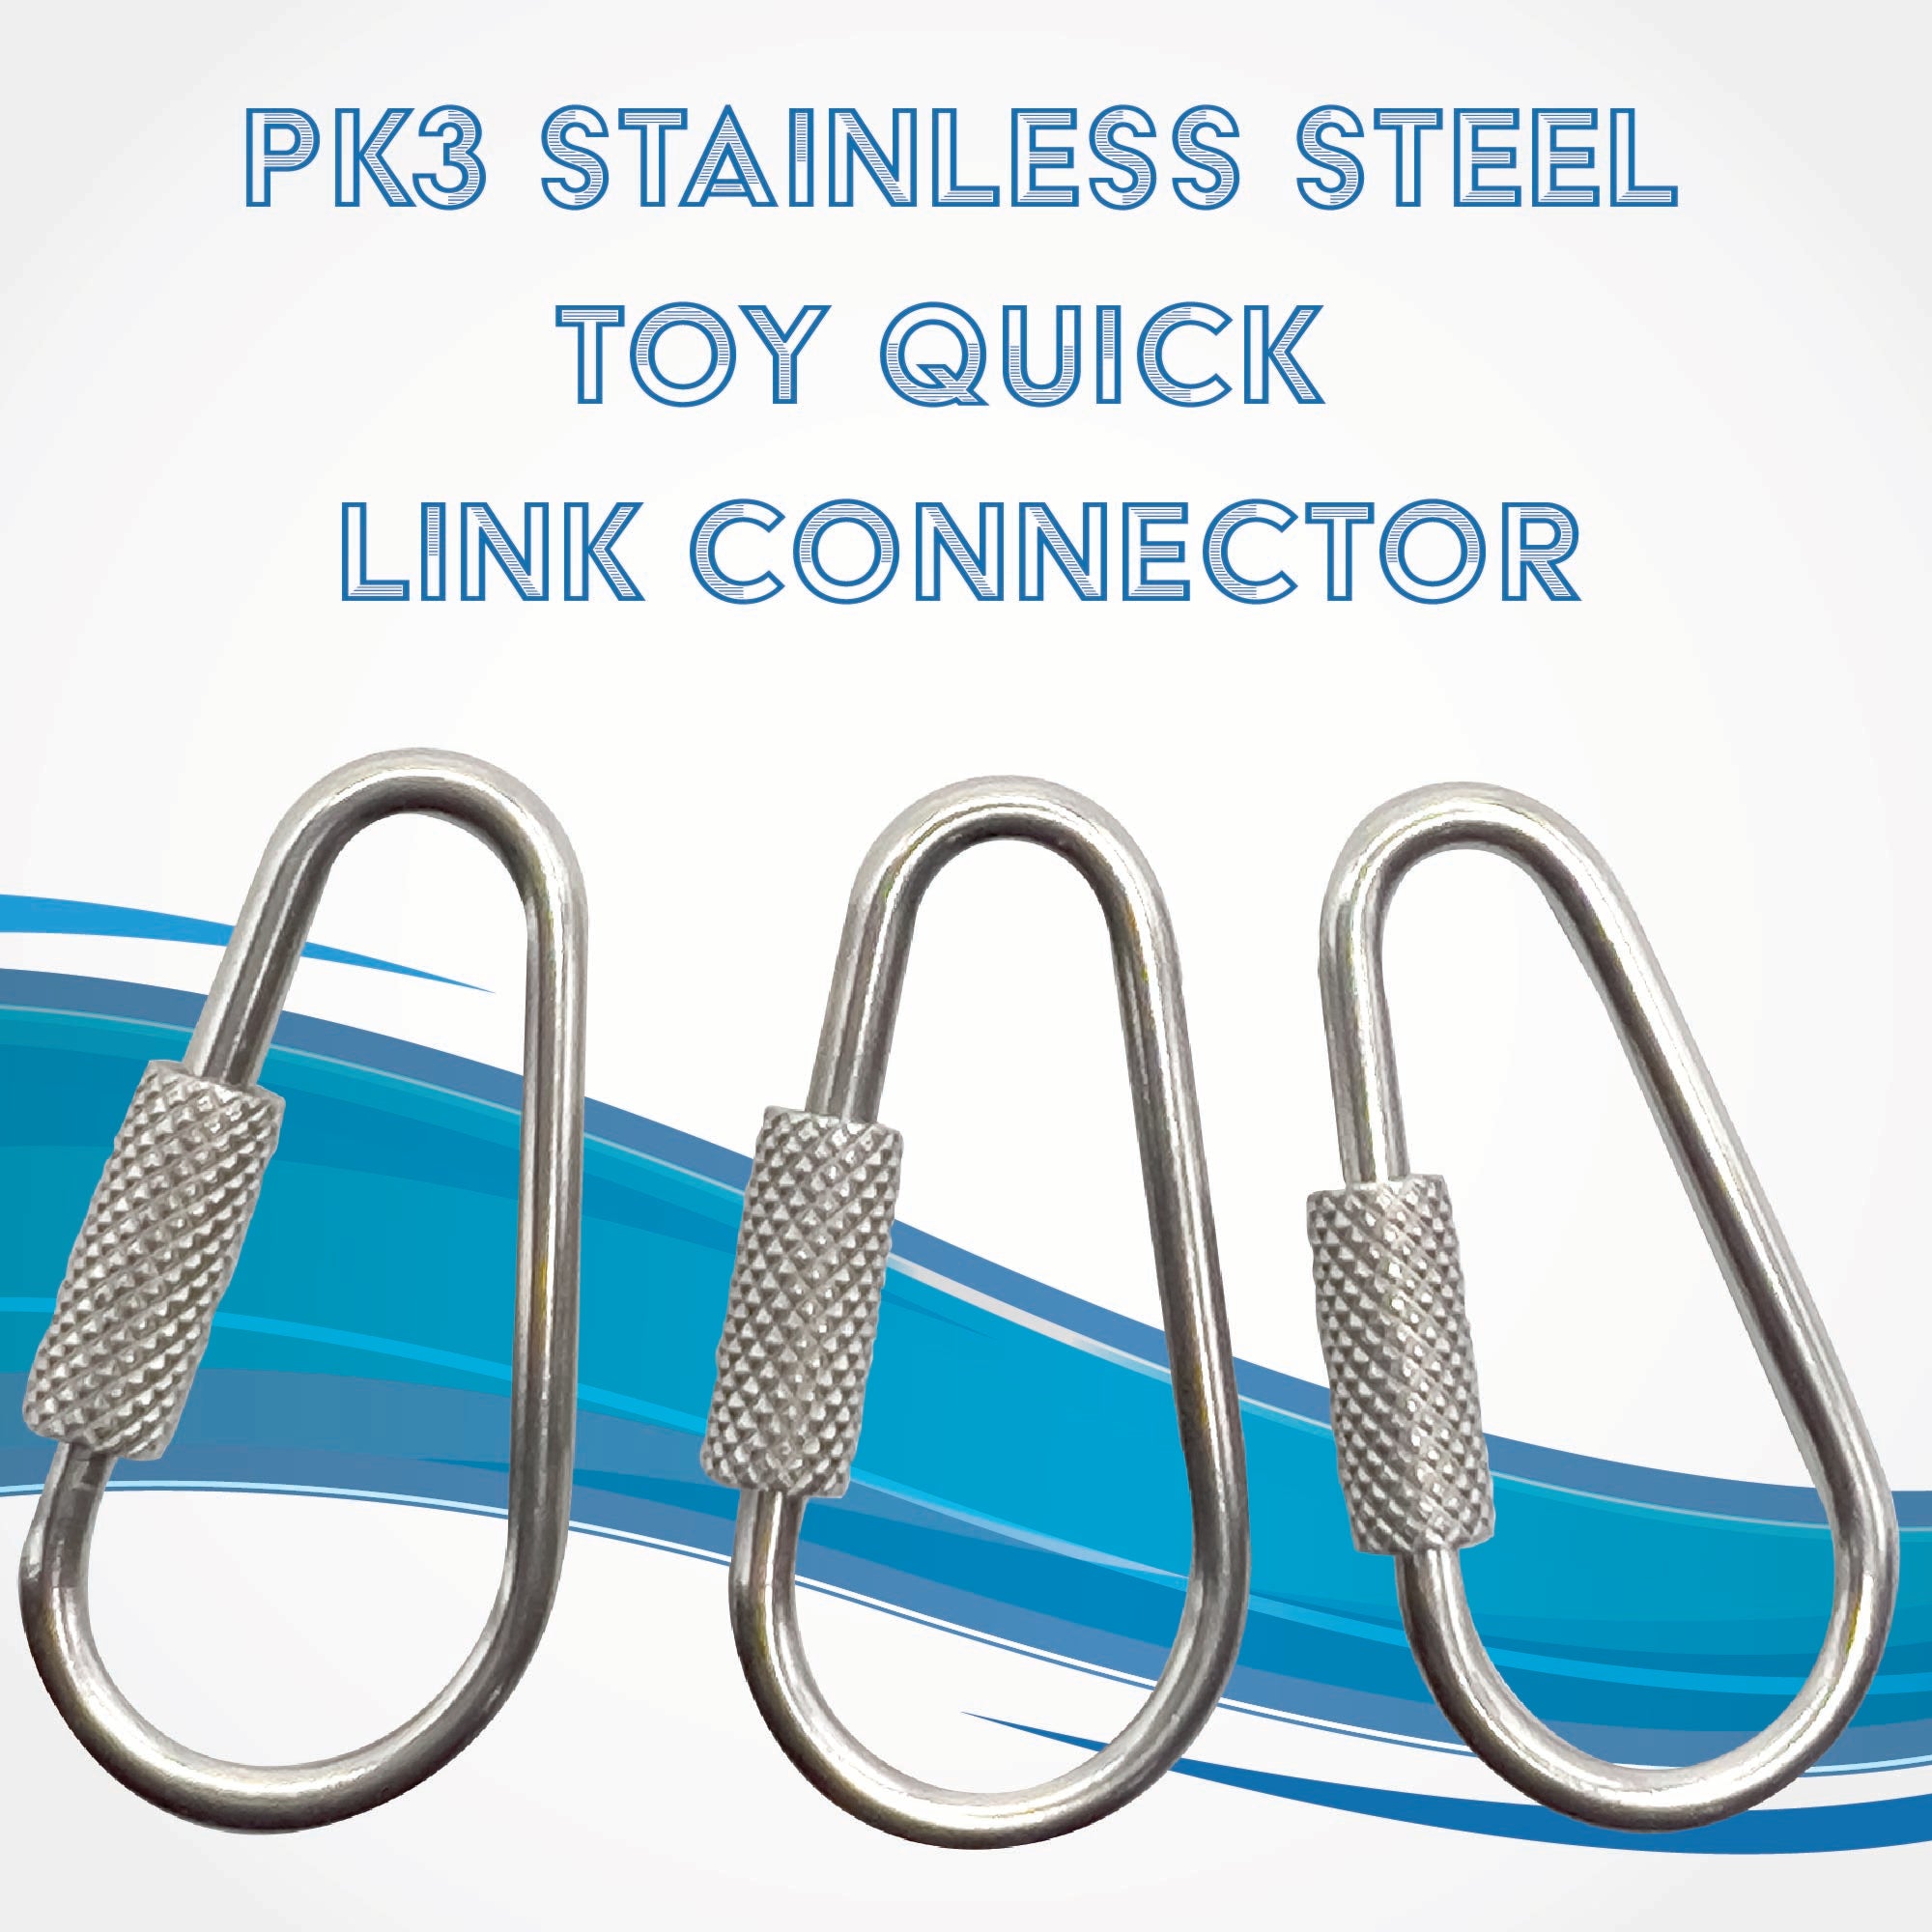 7001 Stainless Steel Toy Quick Link